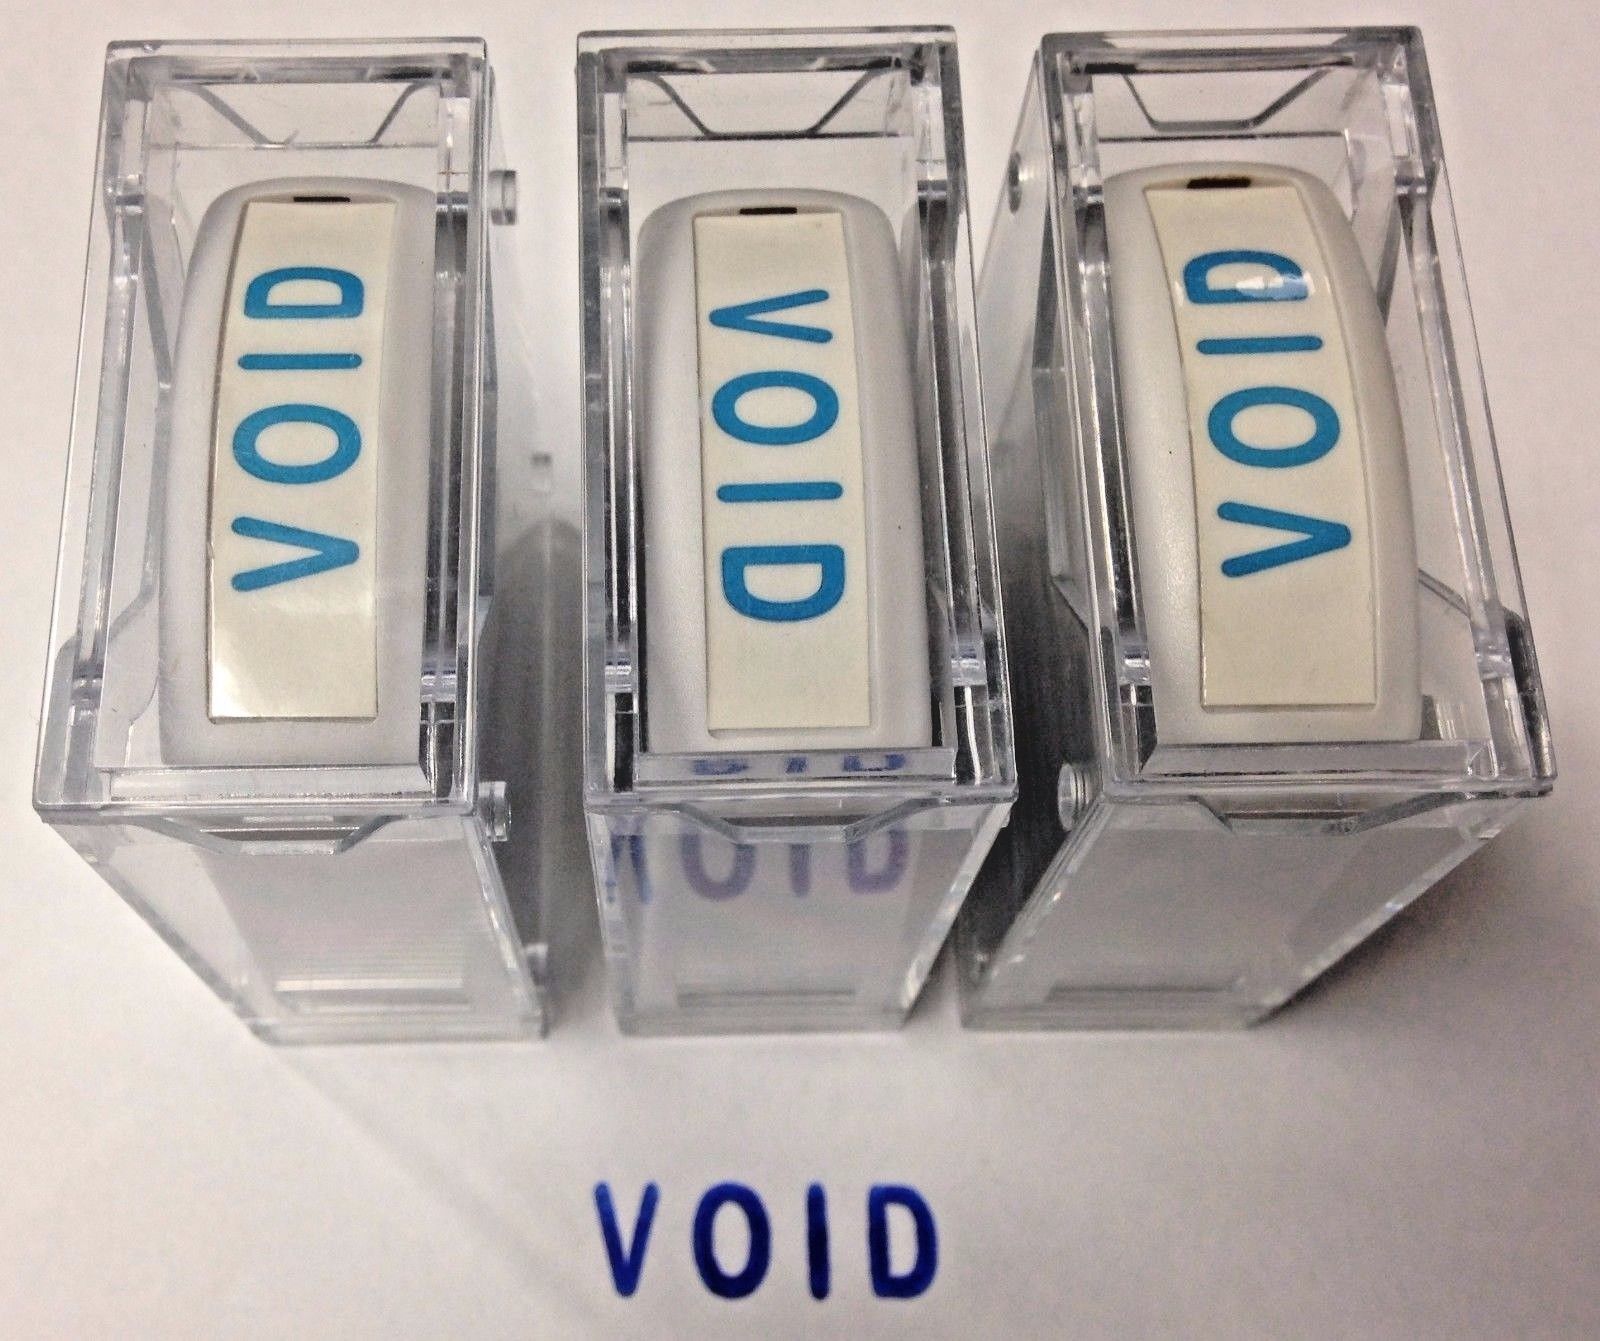 Global AGI-SS02000 Rectangle Stock Pre-Inked Rubber Stamp With "VOID" 3pcs.